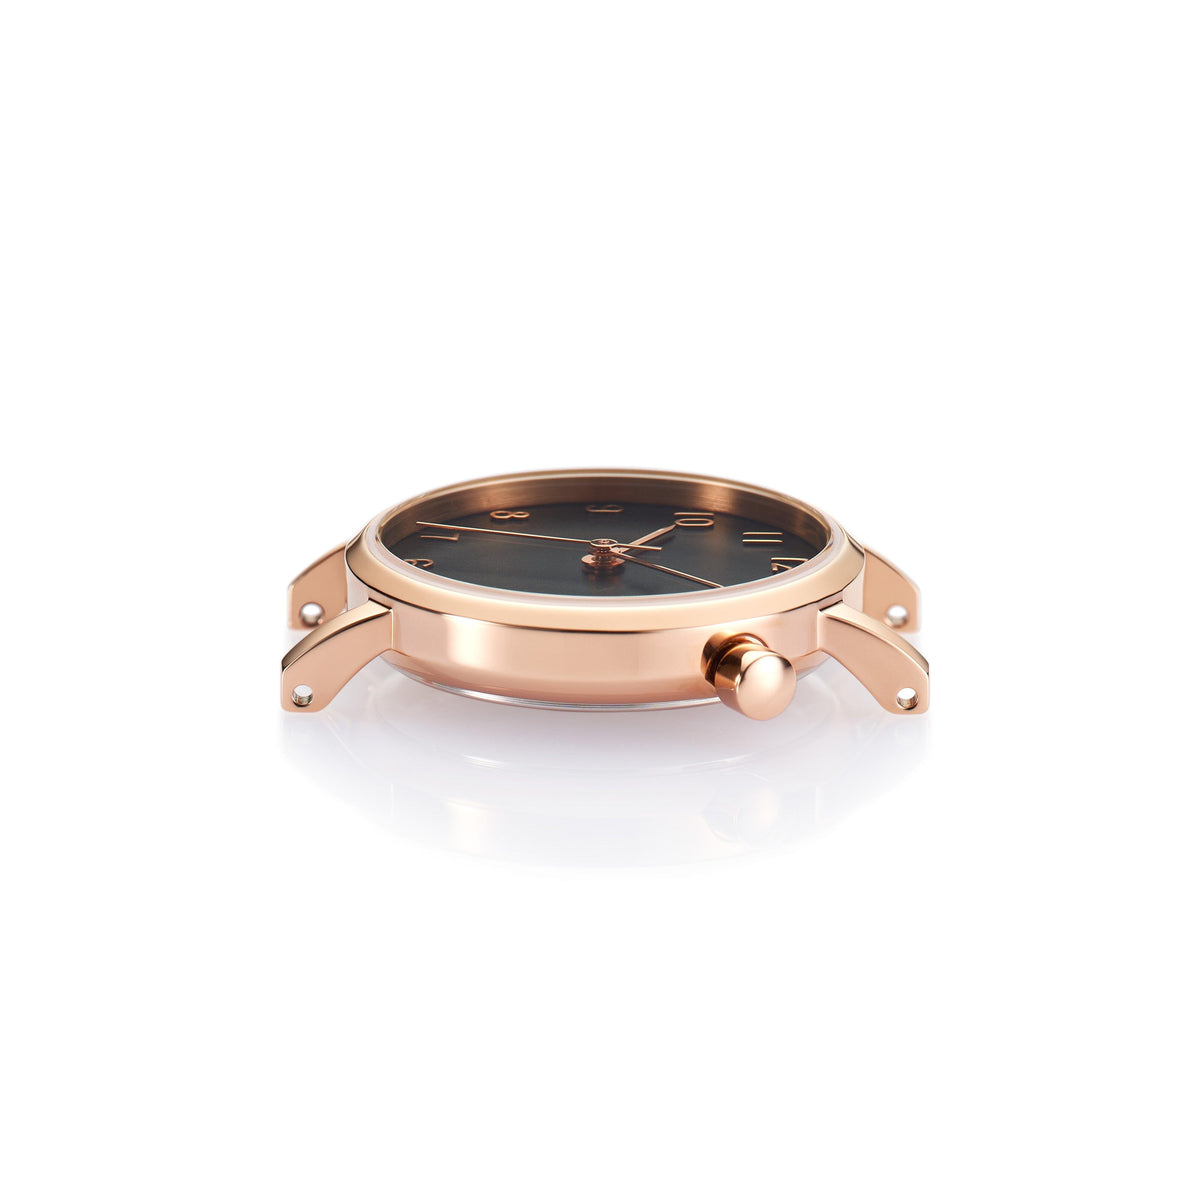 The Black and Rose Gold Watch -  Roads (Kids)